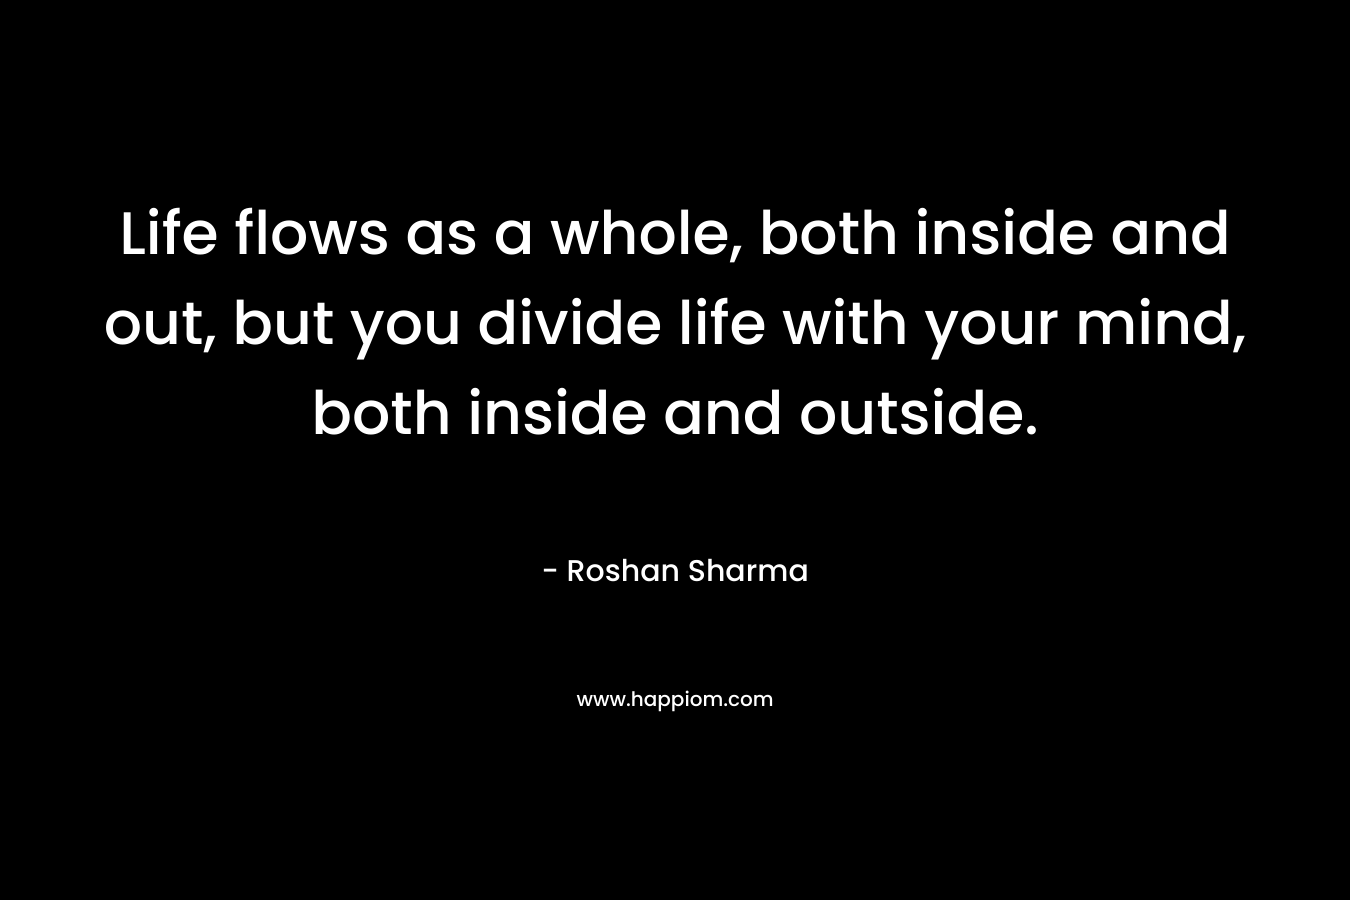 Life flows as a whole, both inside and out, but you divide life with your mind, both inside and outside.